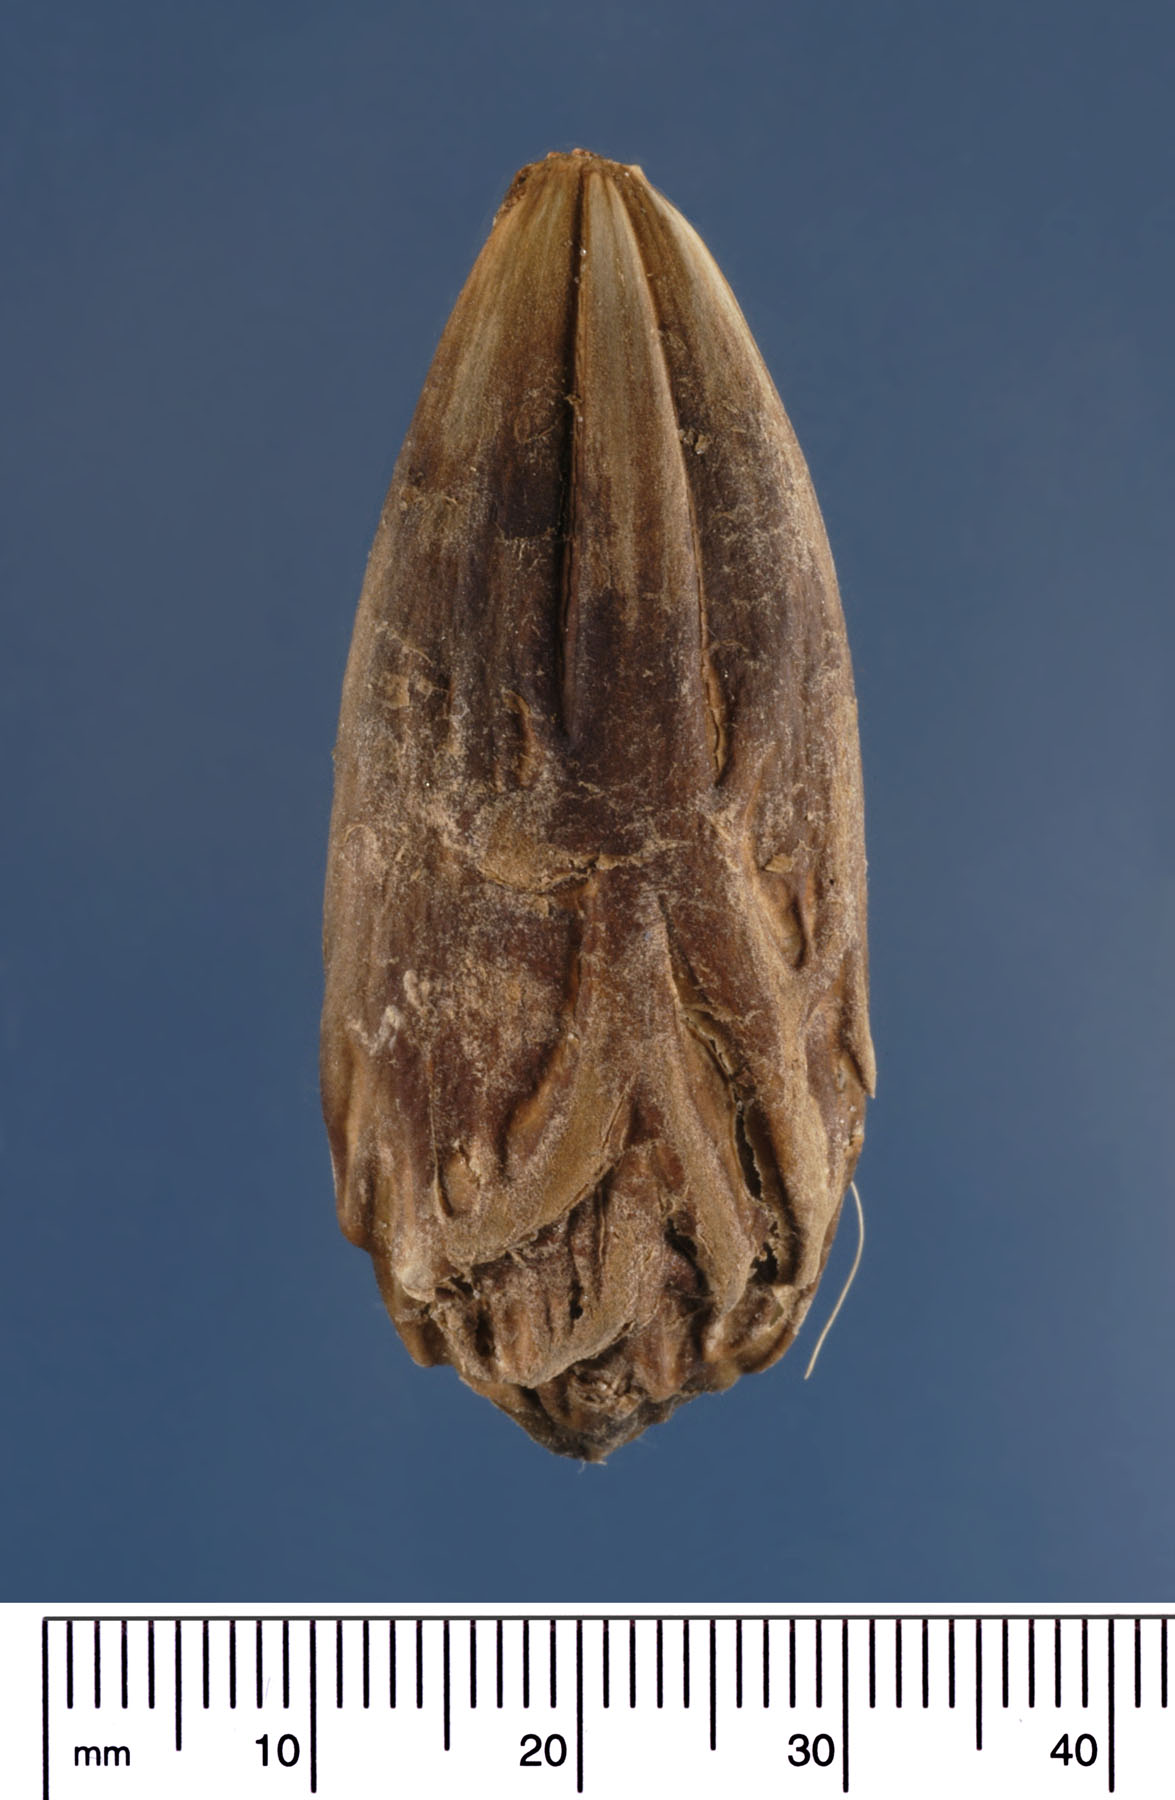   Latania loddigesii  sculpted fruit endocarp (pit) containing a smooth seed. Photograph courtesy of Mariana P. Beckman, DPI 